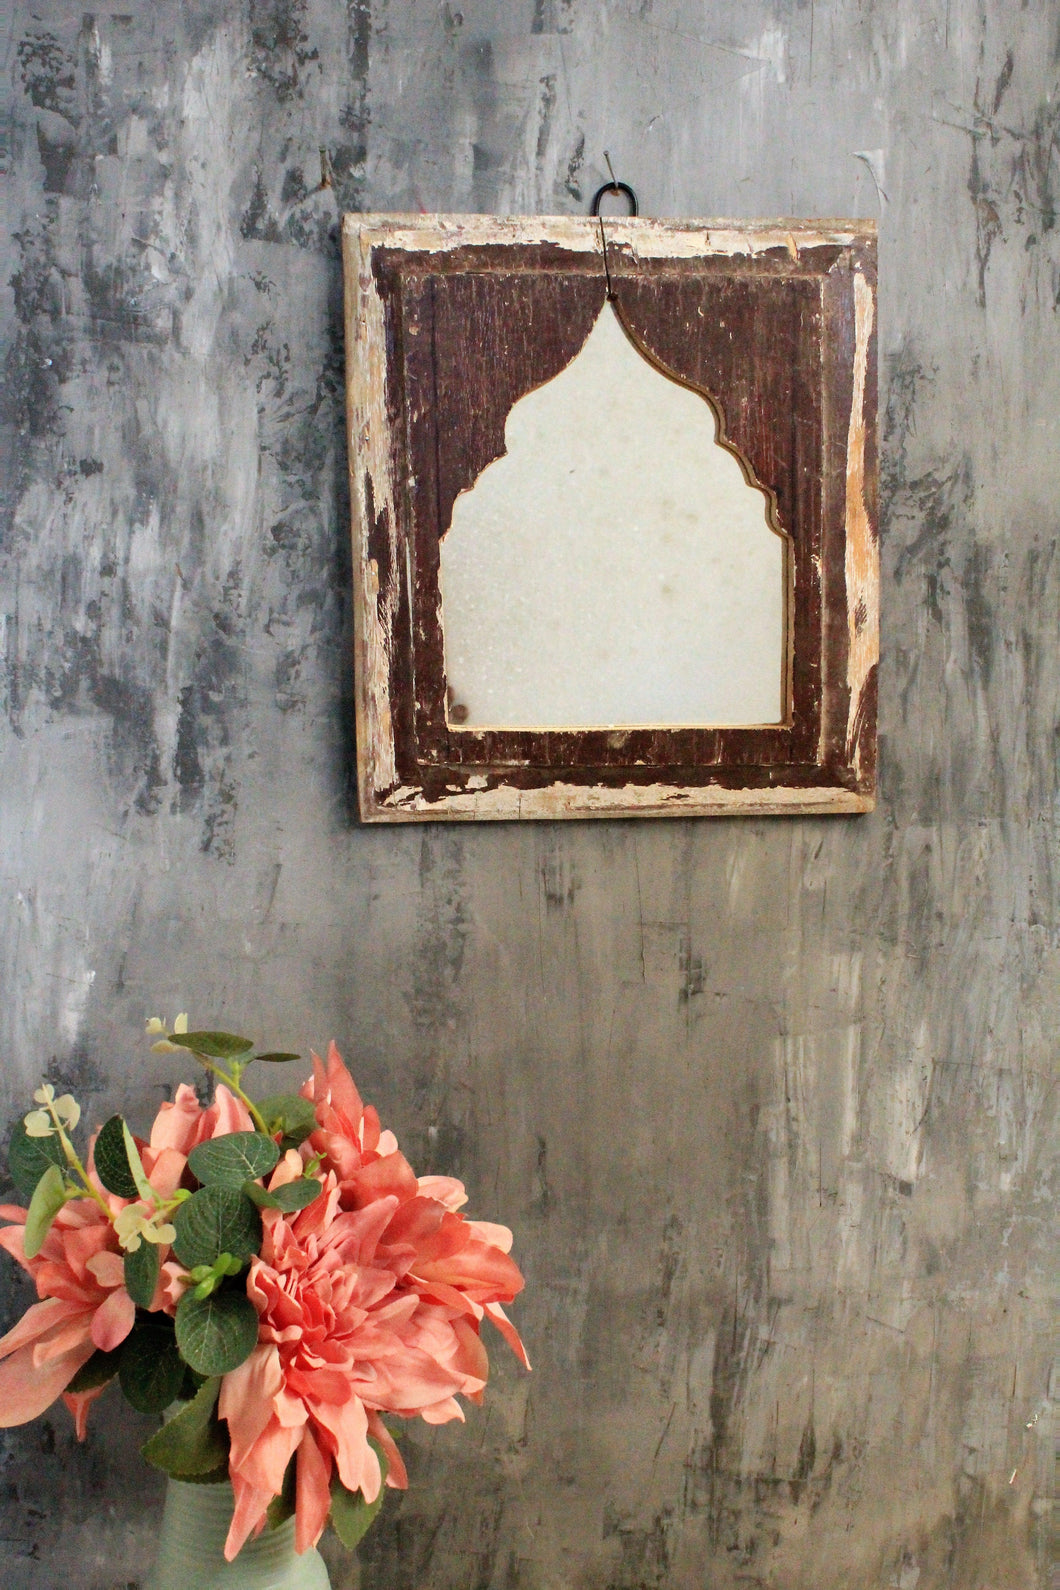 Wooden Distressed Mehraab Mirror Frame made from Vintage Window pane - Style It by Hanika